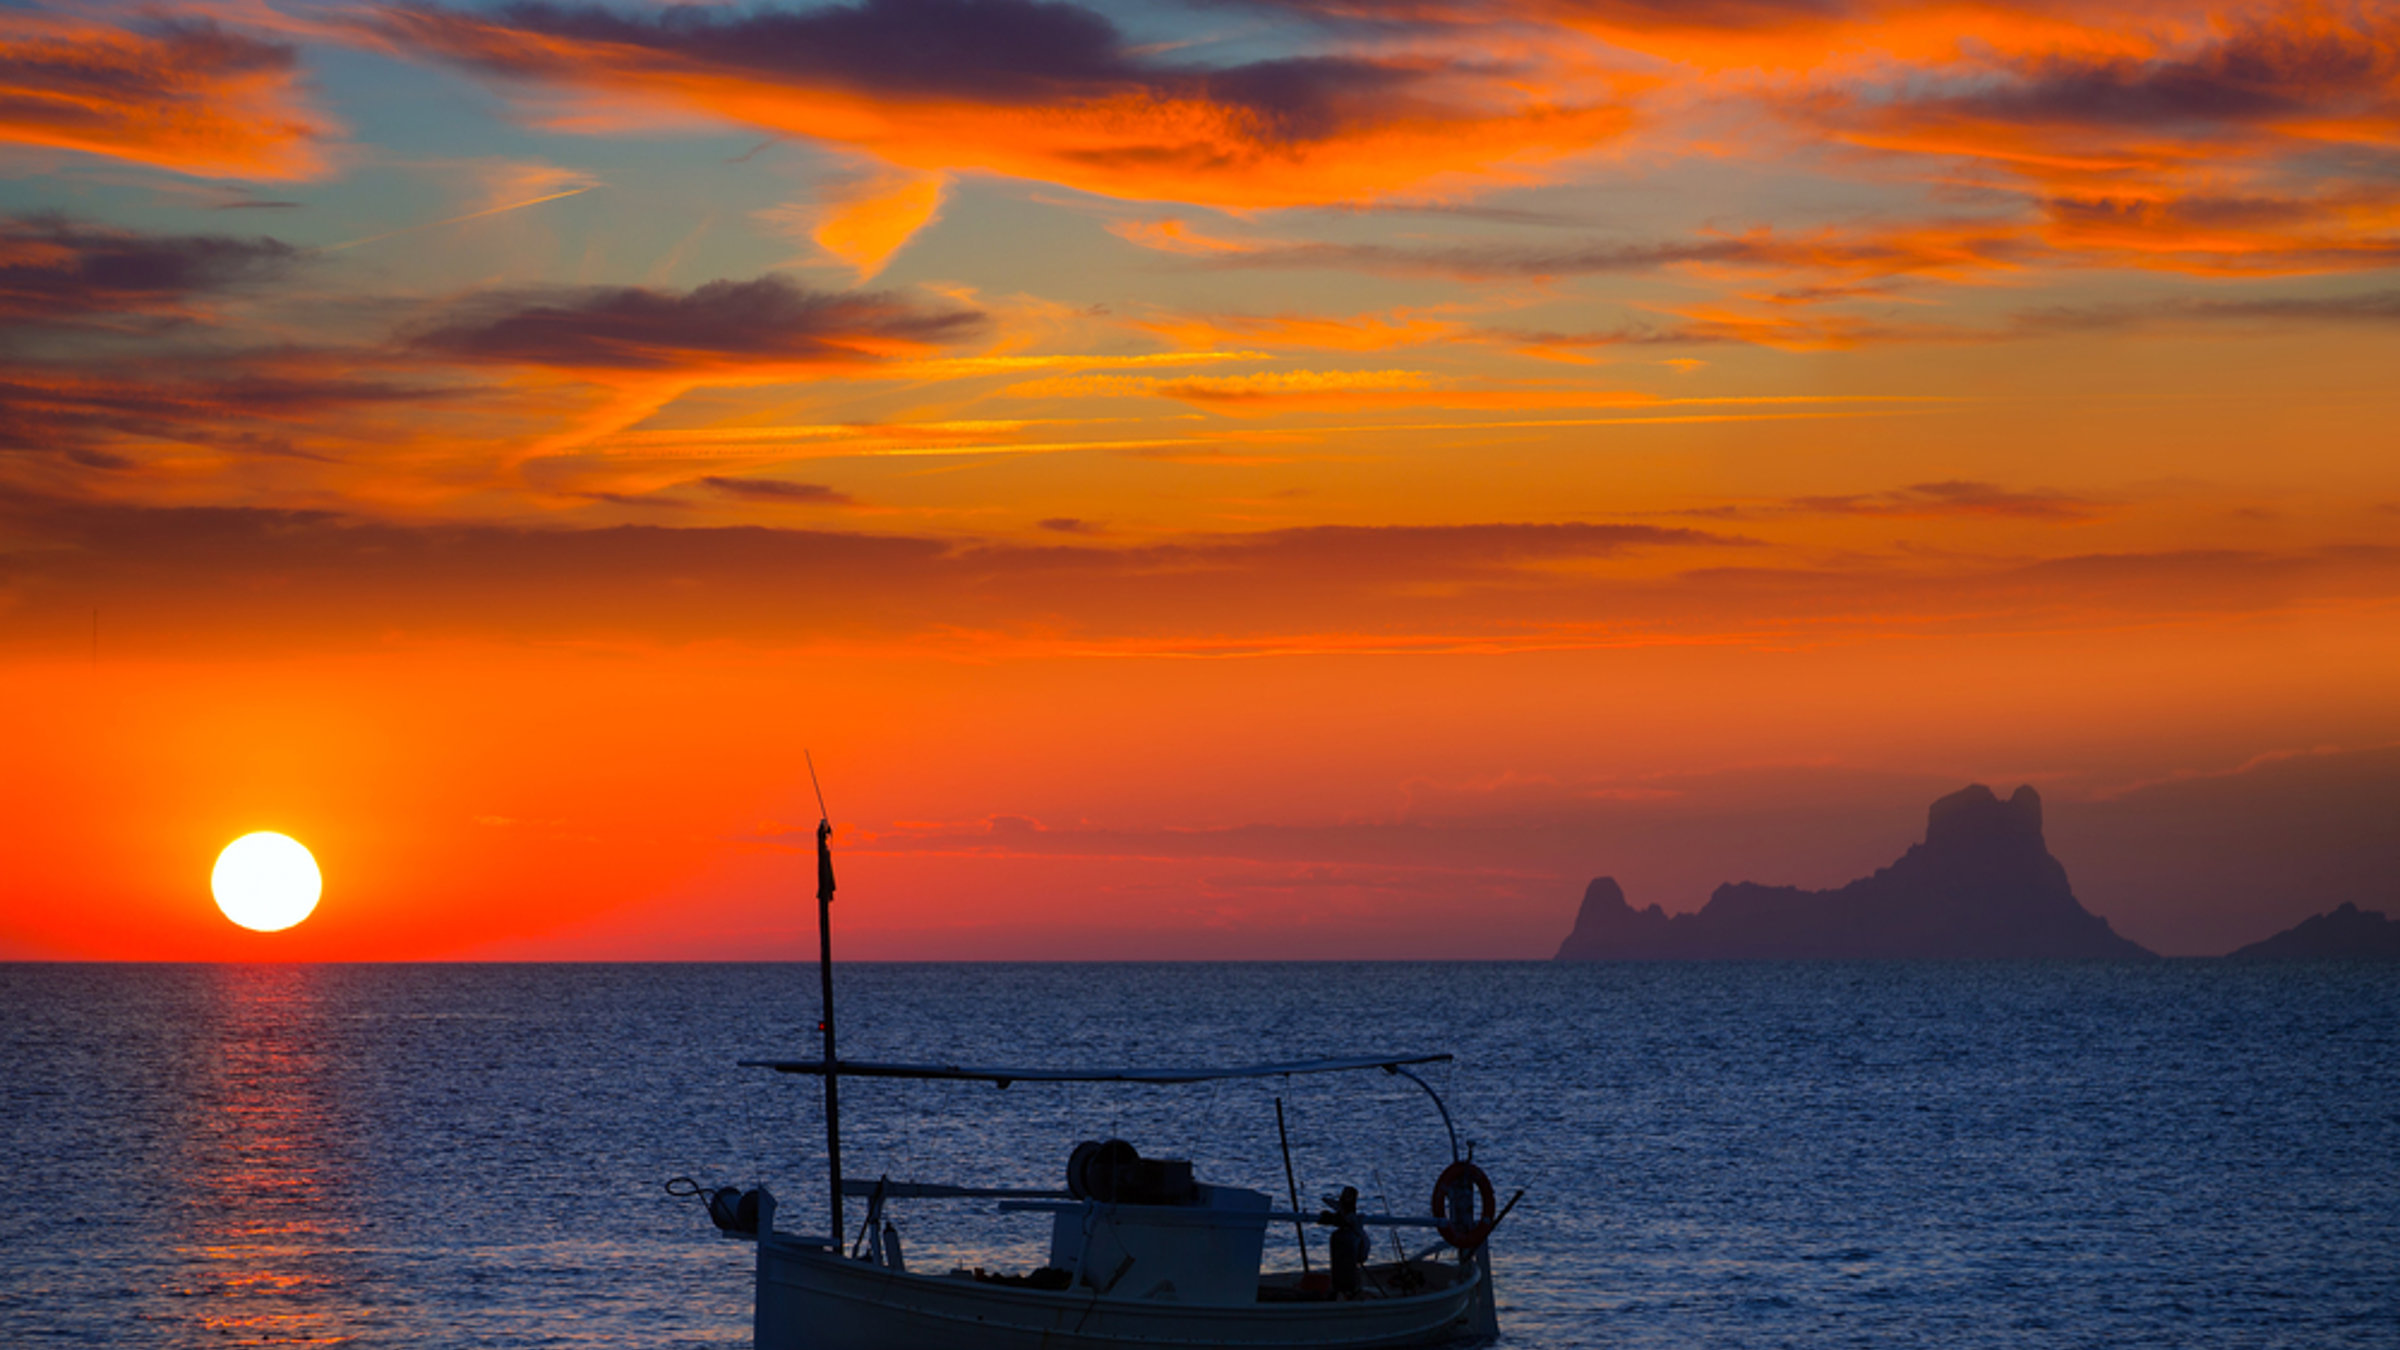 Orange sunset with boat on the sea